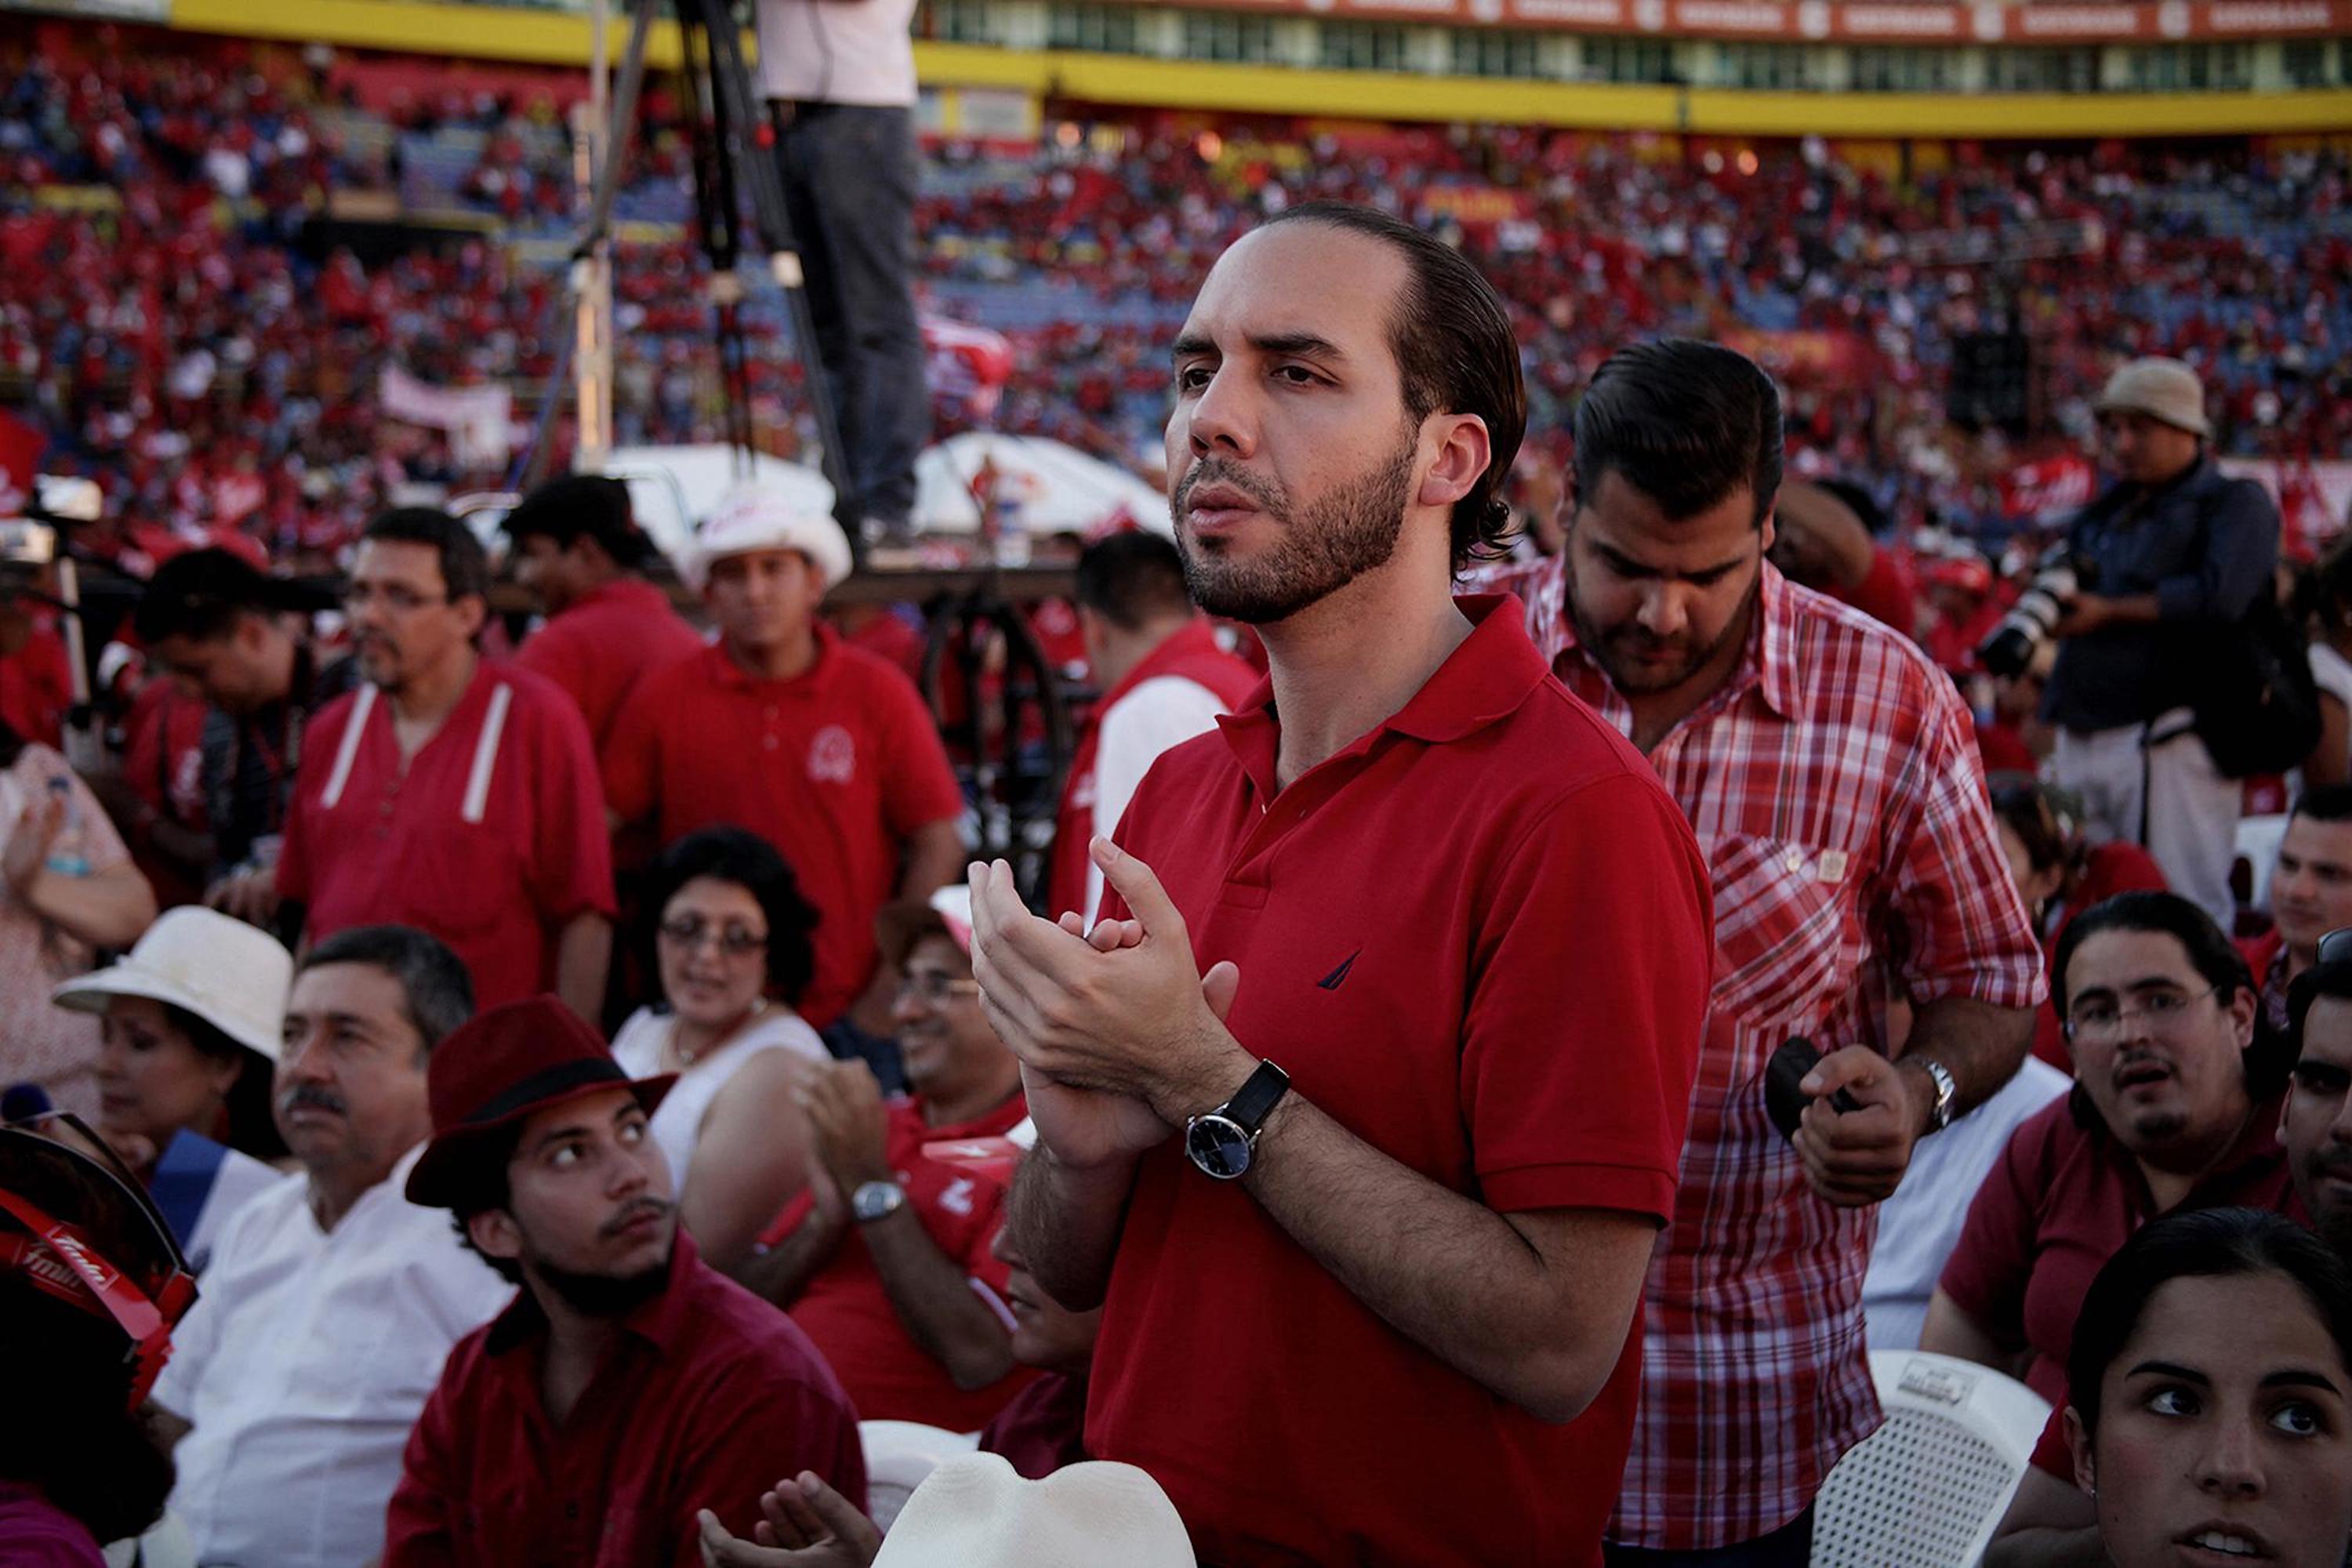 In November of 2012 Nayib Bukele attended the FMLN general assembly in San Salvador